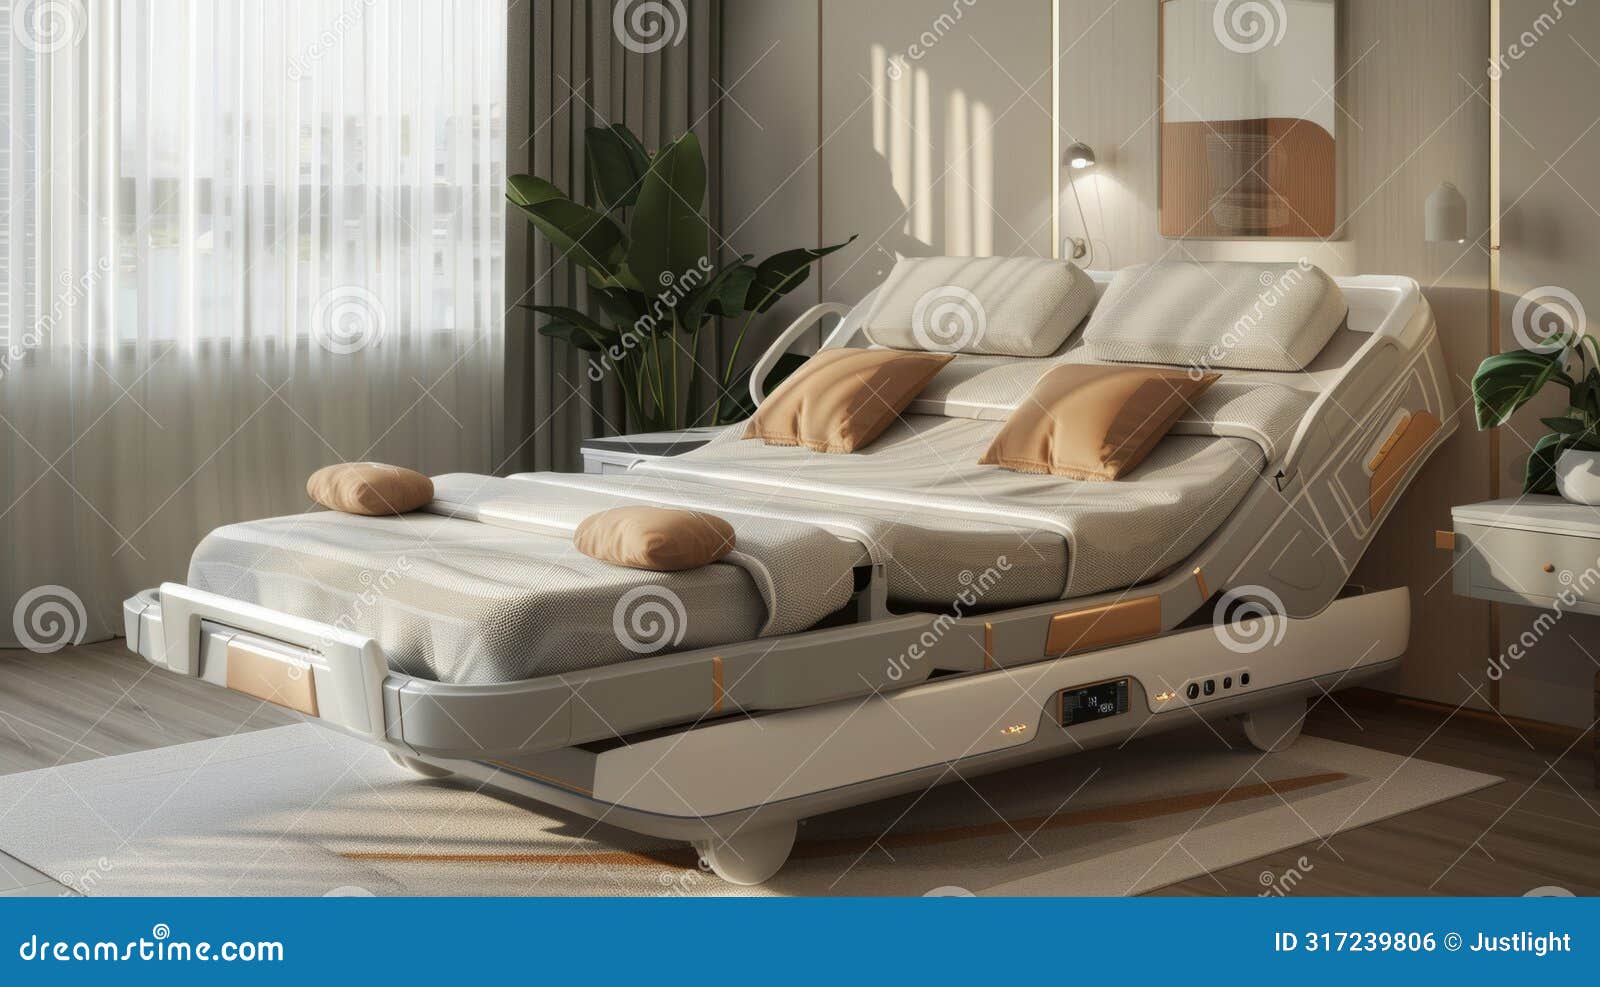 a smart bed with iot technology that automatically adjusts the patients position for better circulation and comfort